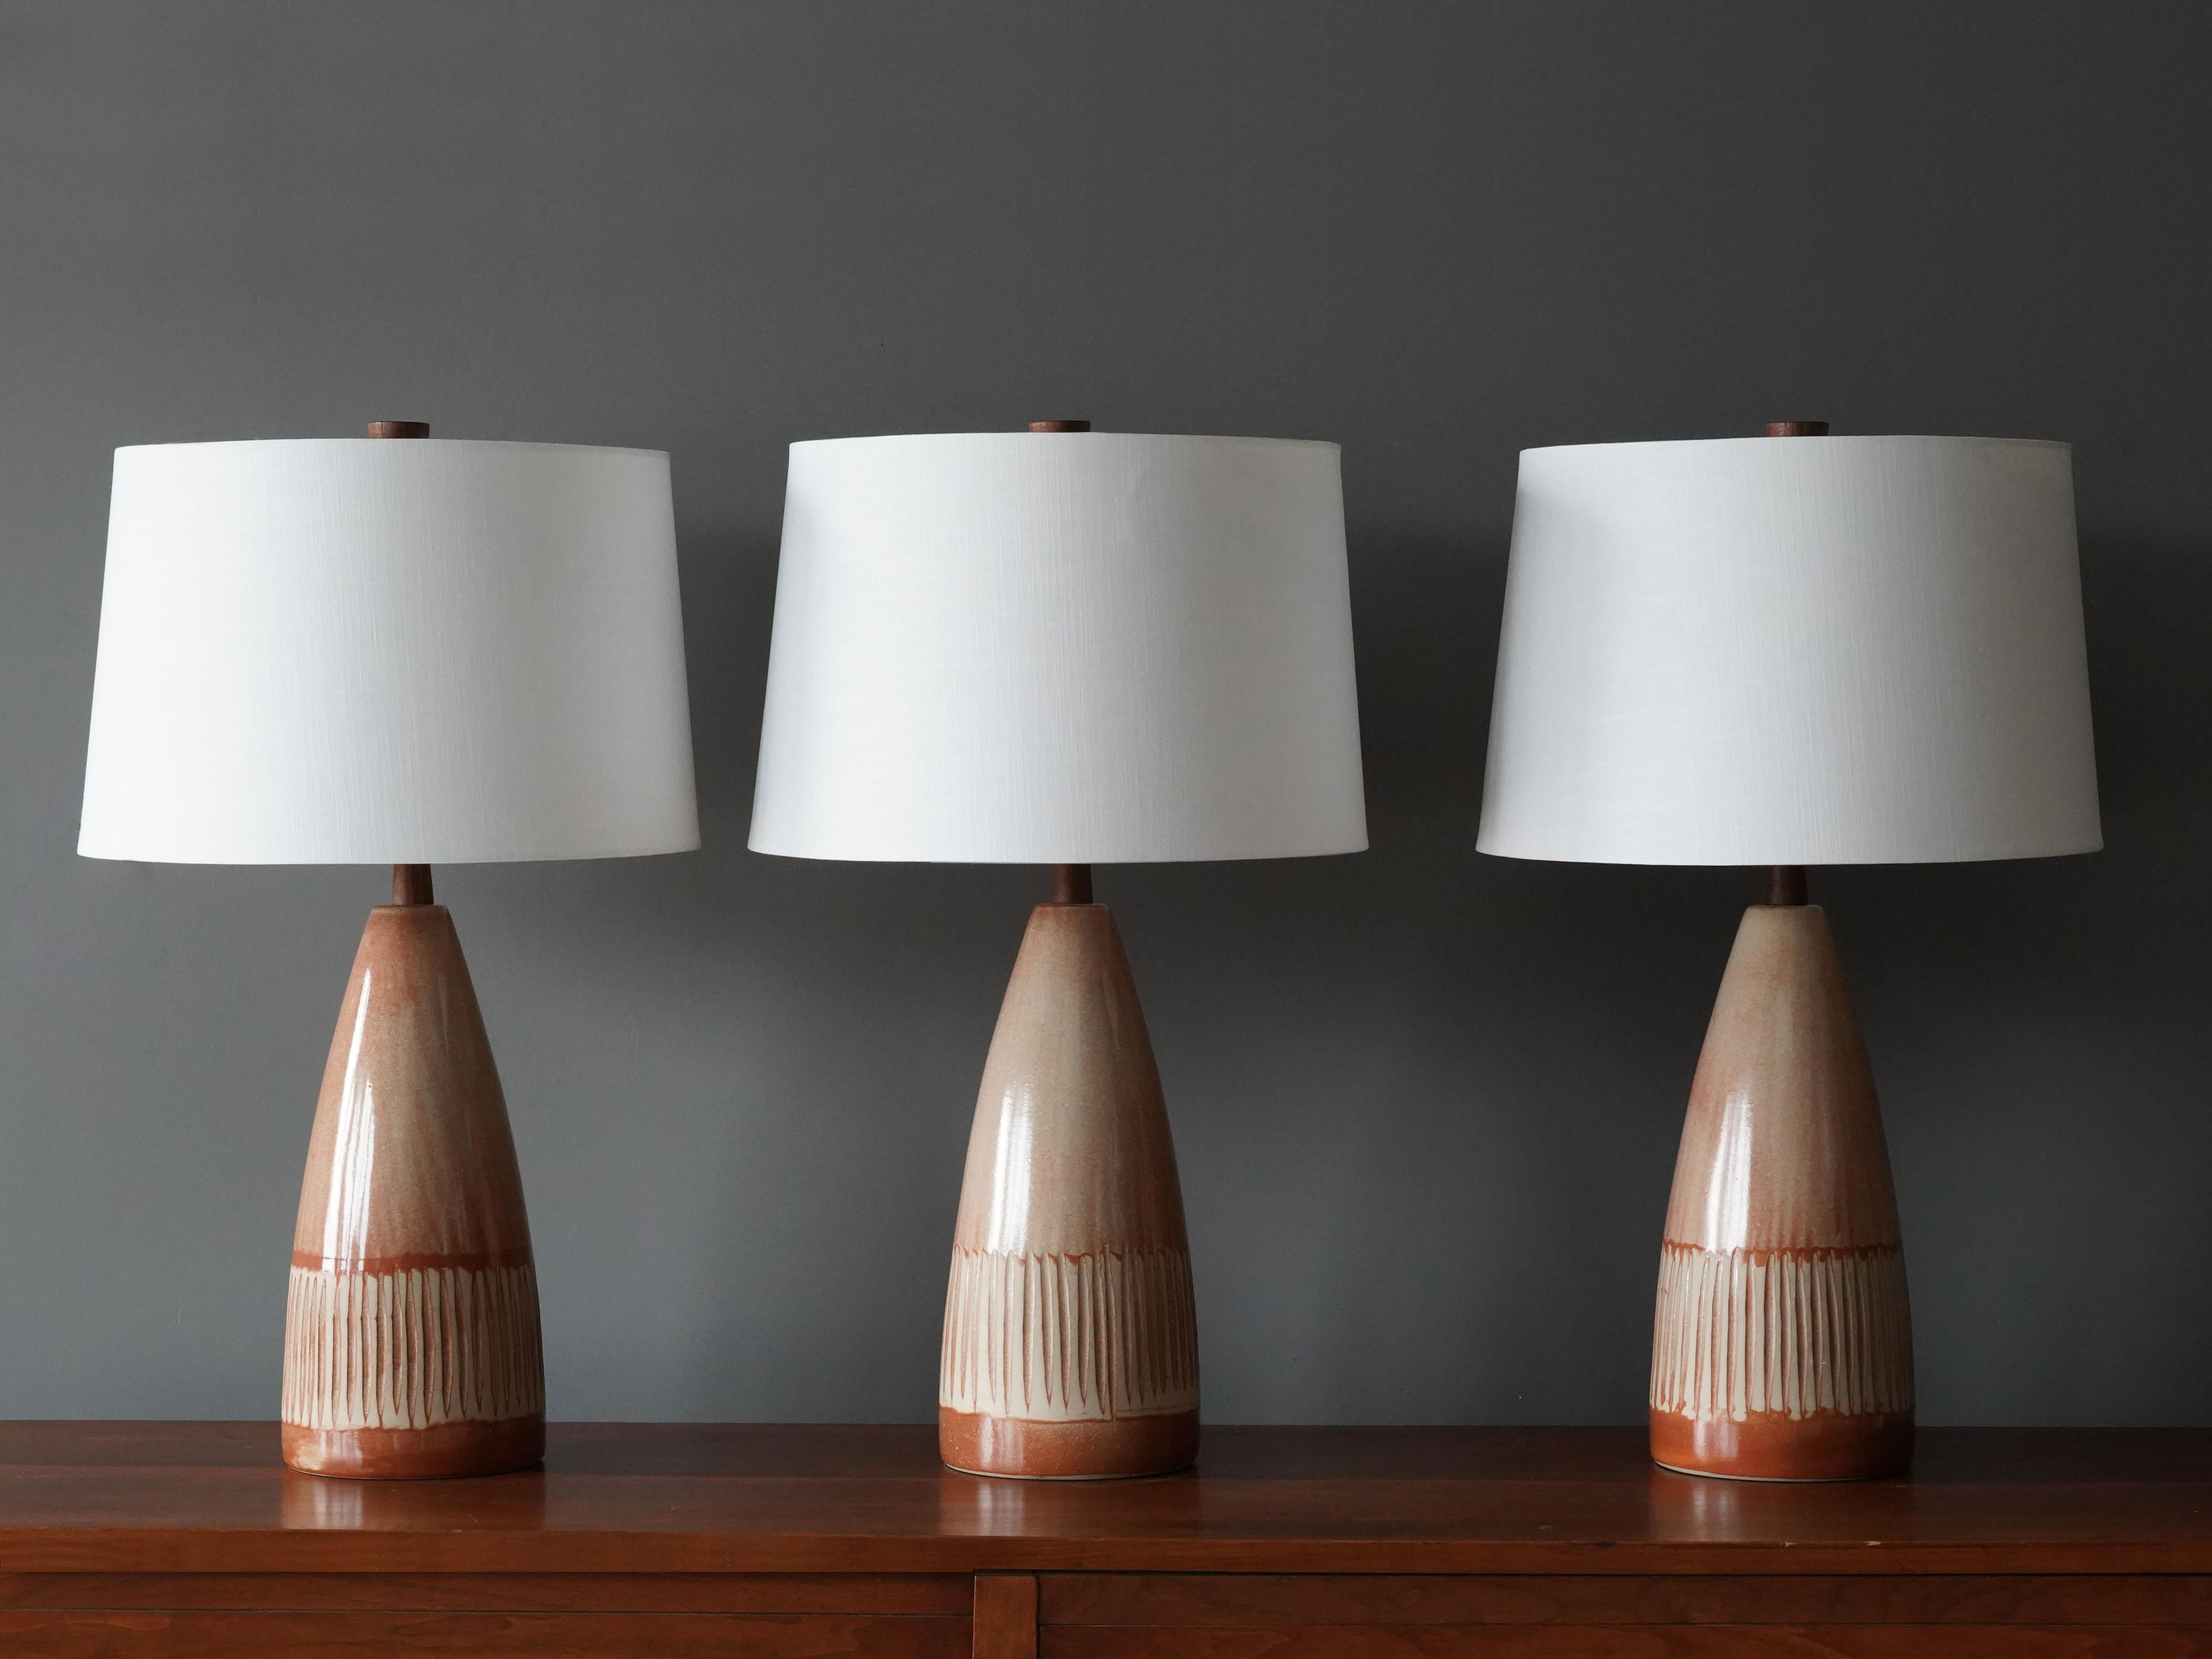 A pair of table lamps designed by husband and wife duo Jane & Gordon Martz. Produced by Marshall Studios, Indianapolis. 

The bases are slip-cast and then dipped into glaze and hand painted. Design also incorporates exquisite walnut necks and